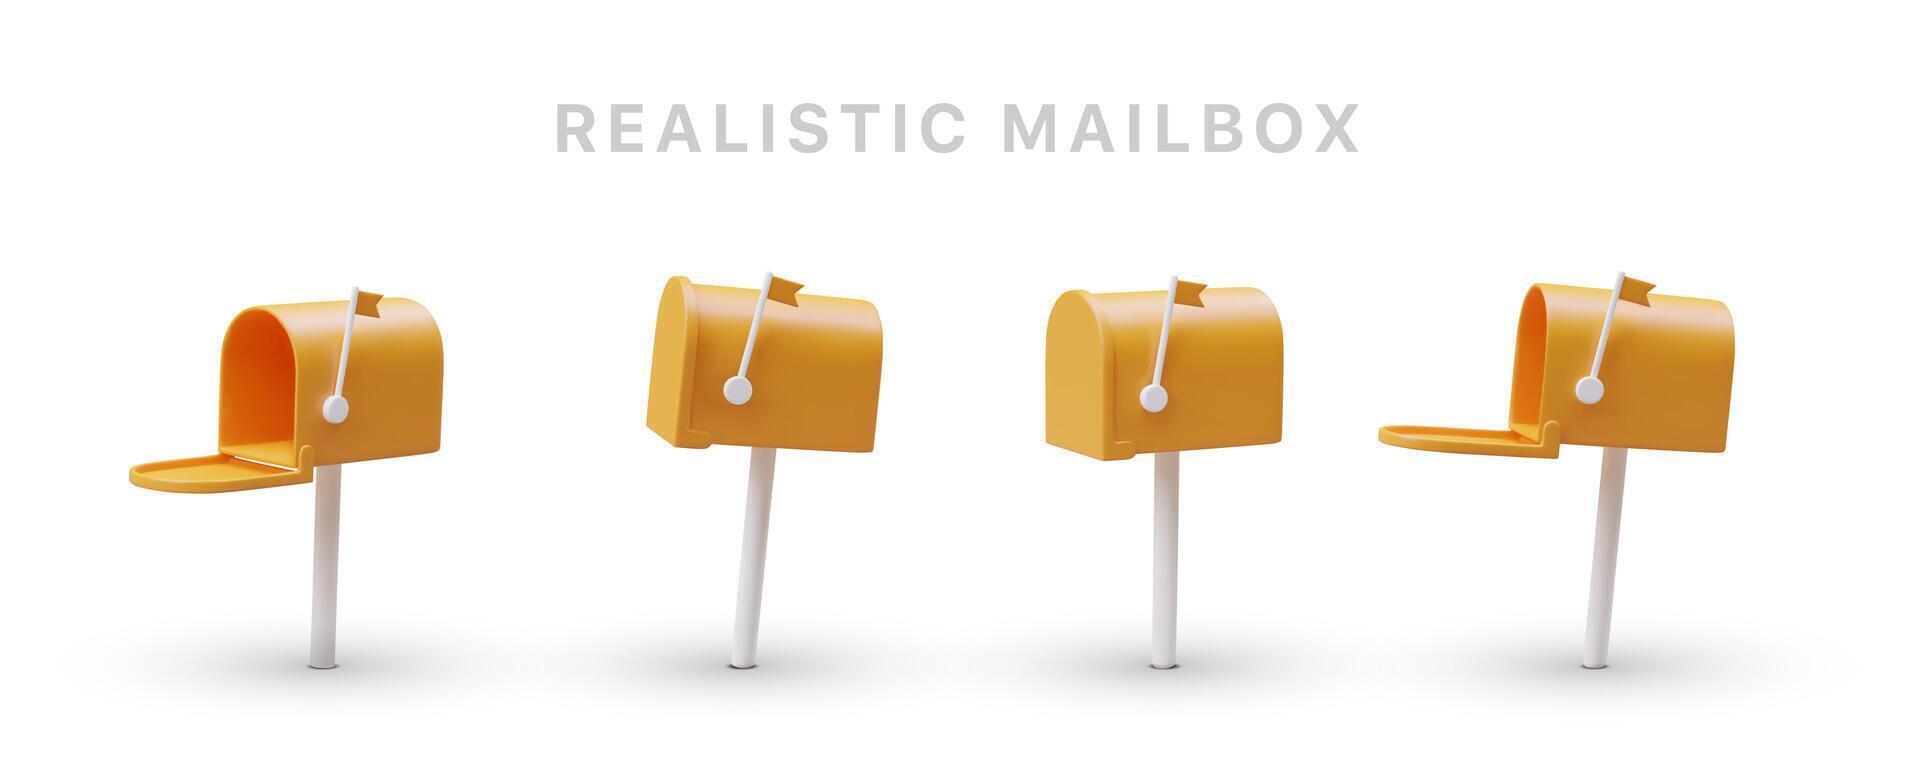 Yellow realistic mailboxes with raised flag. 3D set of icons for messengers, mail applications vector